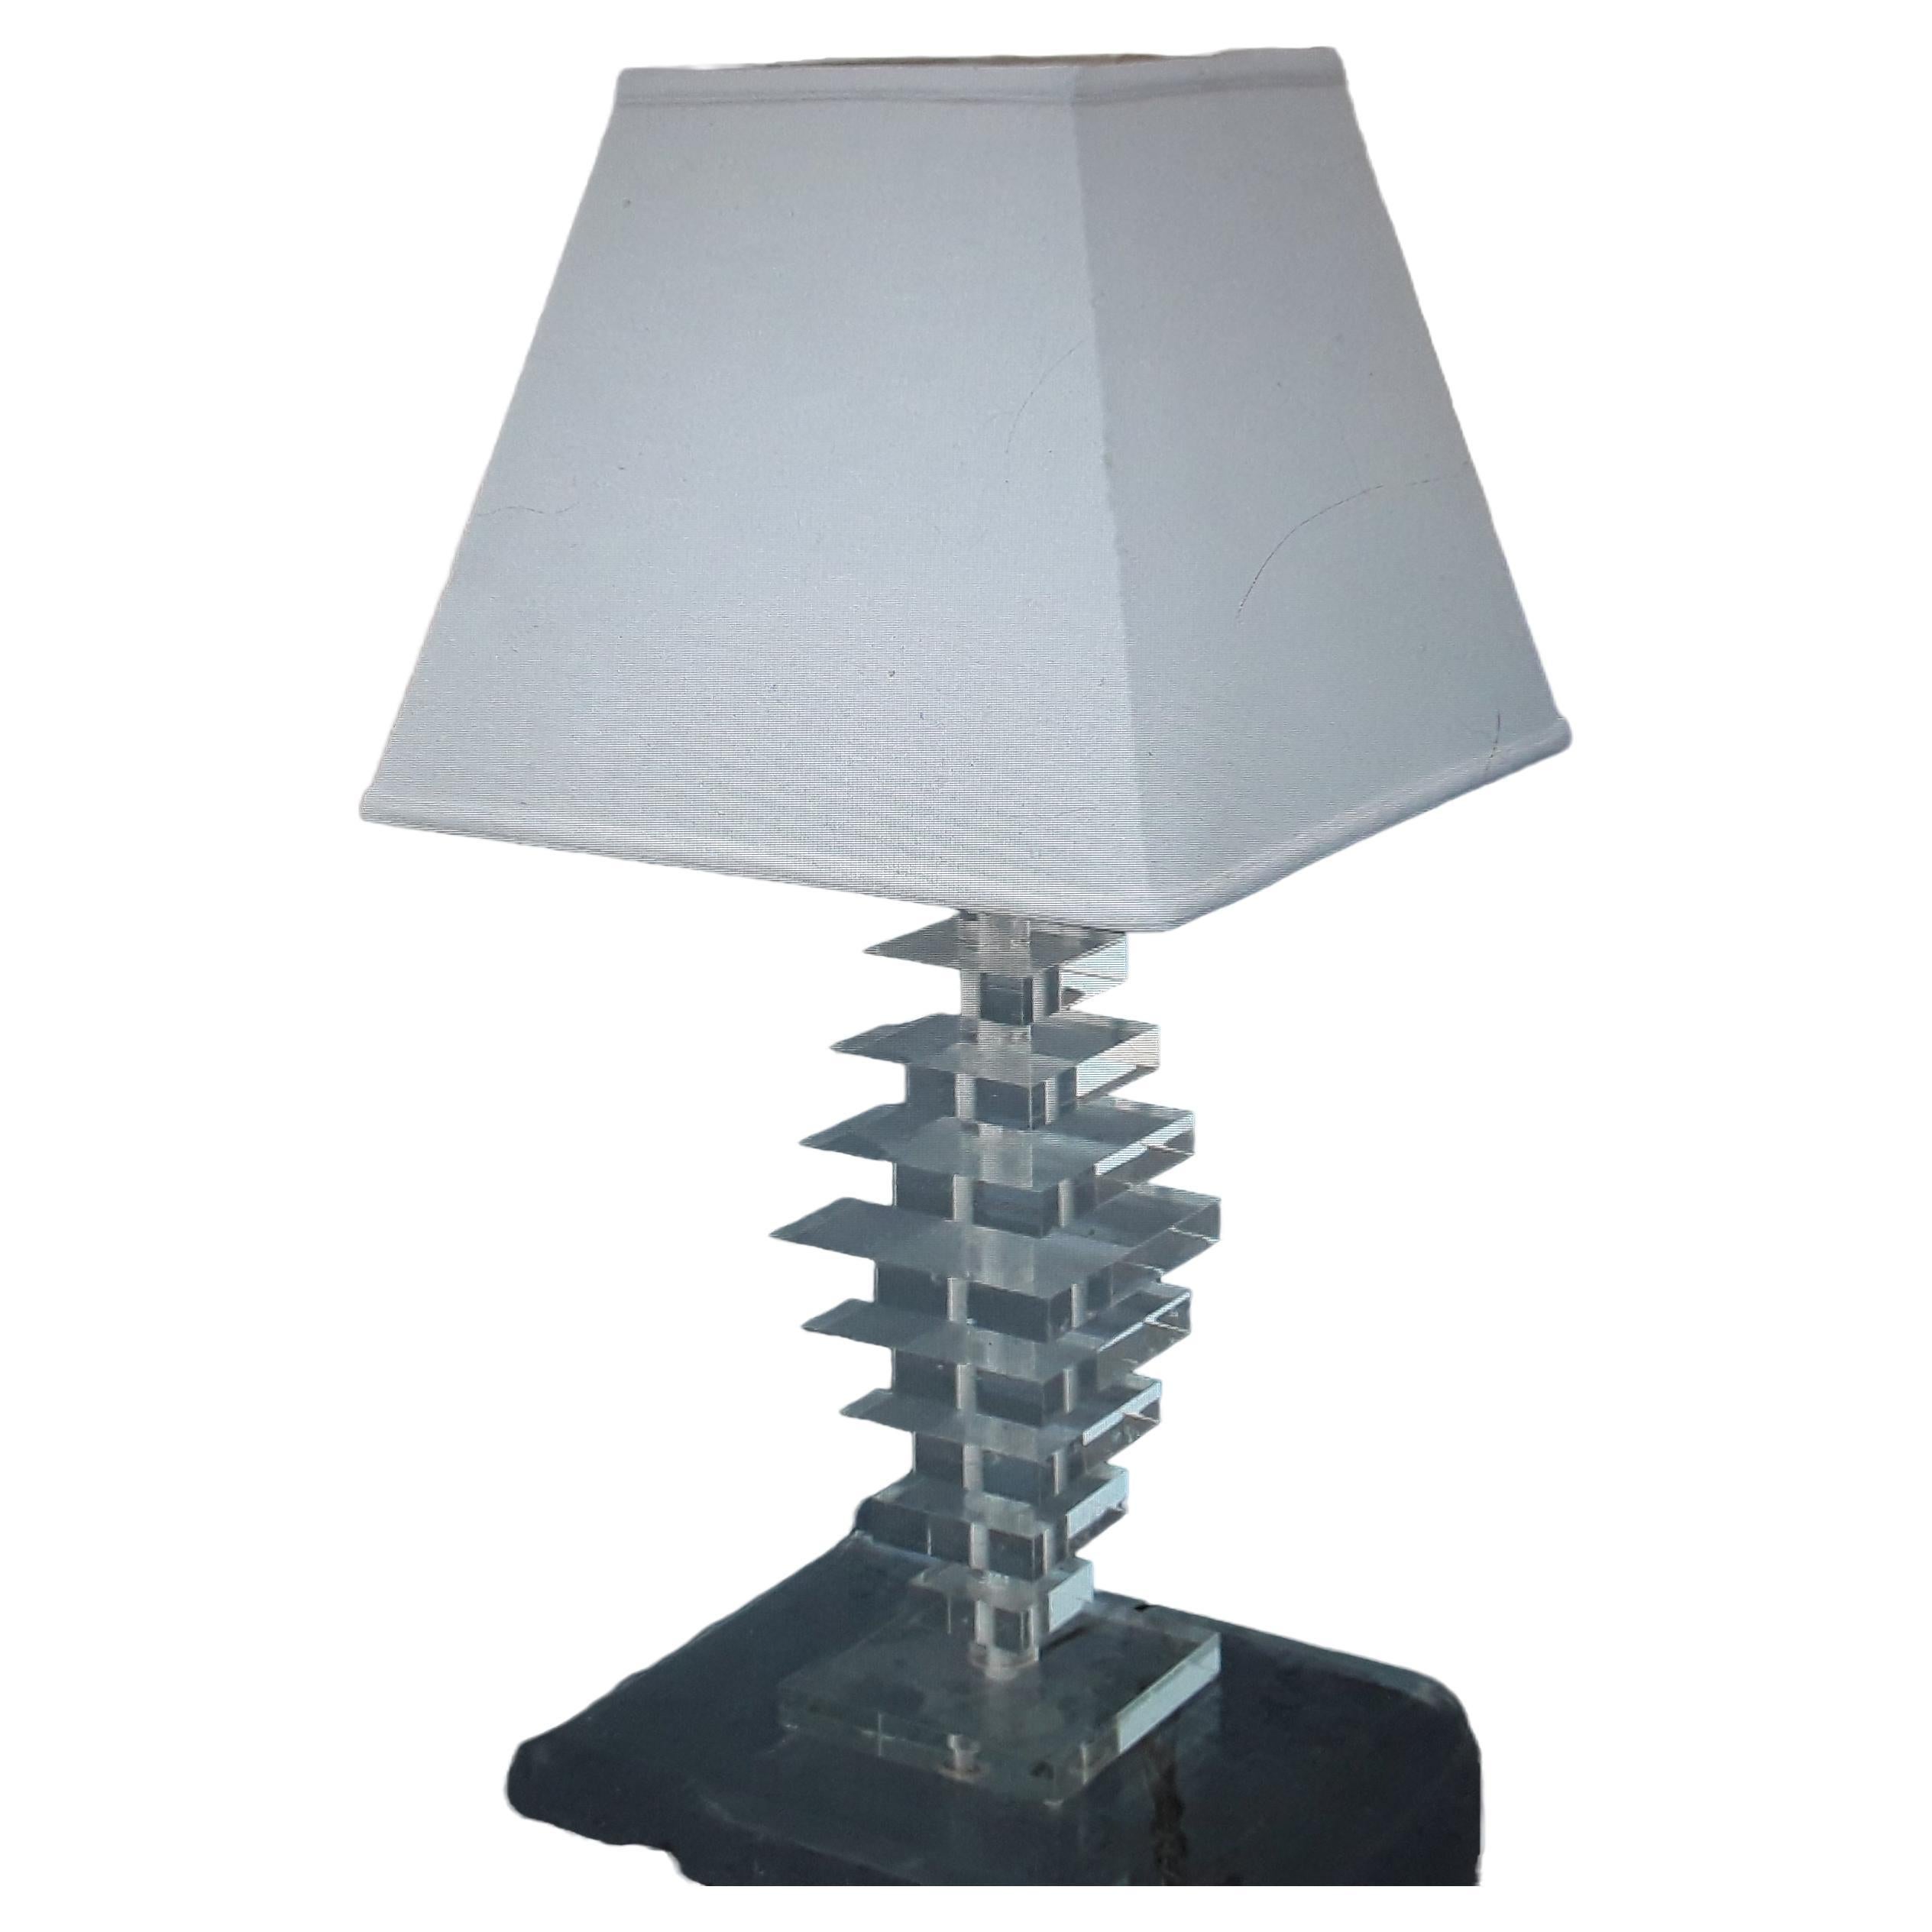 High Quality 1960's Mid Century Modern Stacked Lucite Table Lamp. Shade included. Beautiful lamp!